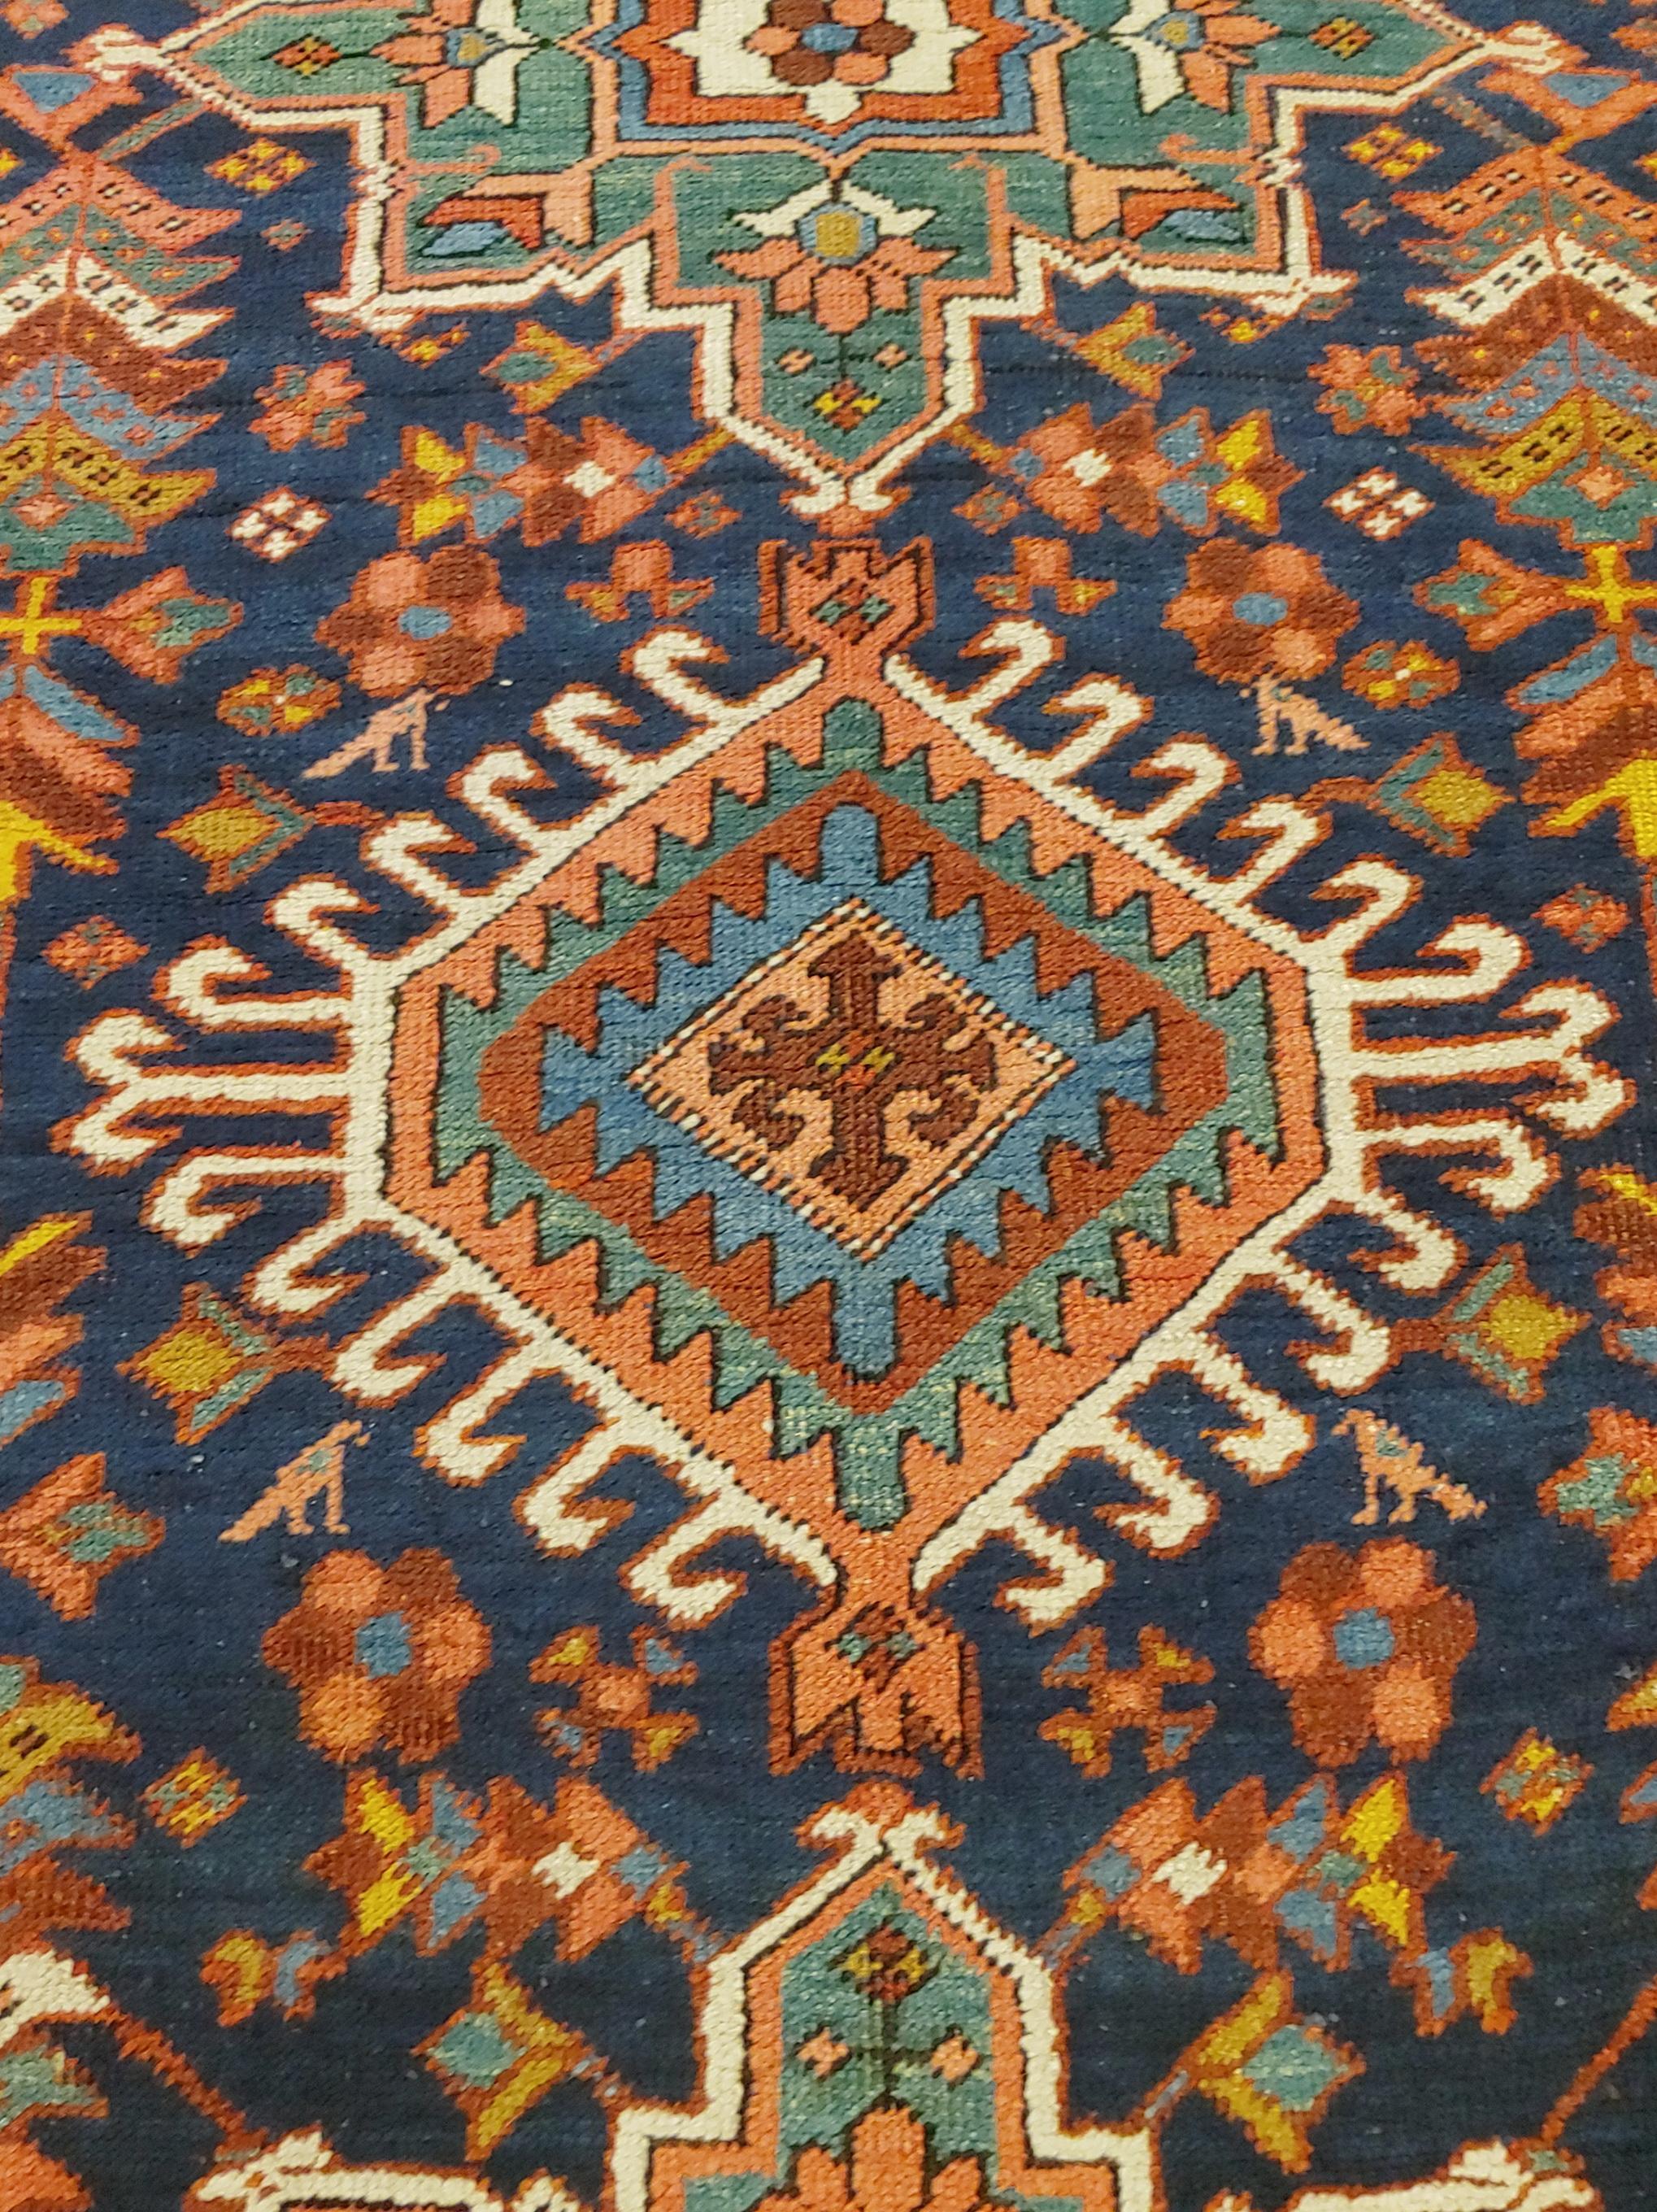 Antique Persian Karaja, Geometric Design, Green on Navy, Wool, Scatter Size In Good Condition For Sale In Williamsburg, VA